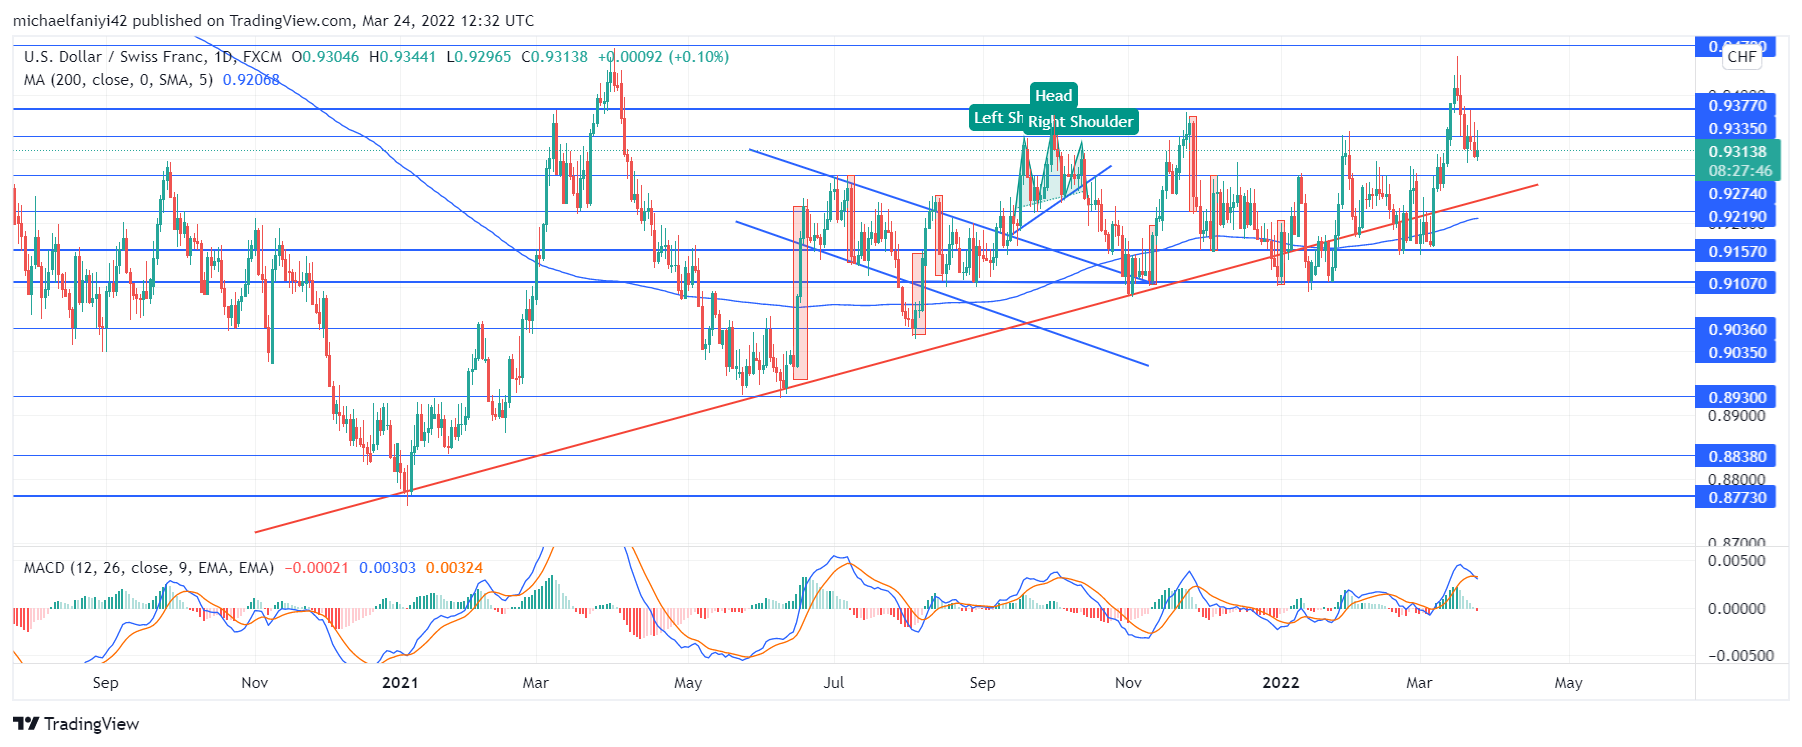 USDCHF Resumes Uptrend; Strives to Match Last Year’s High